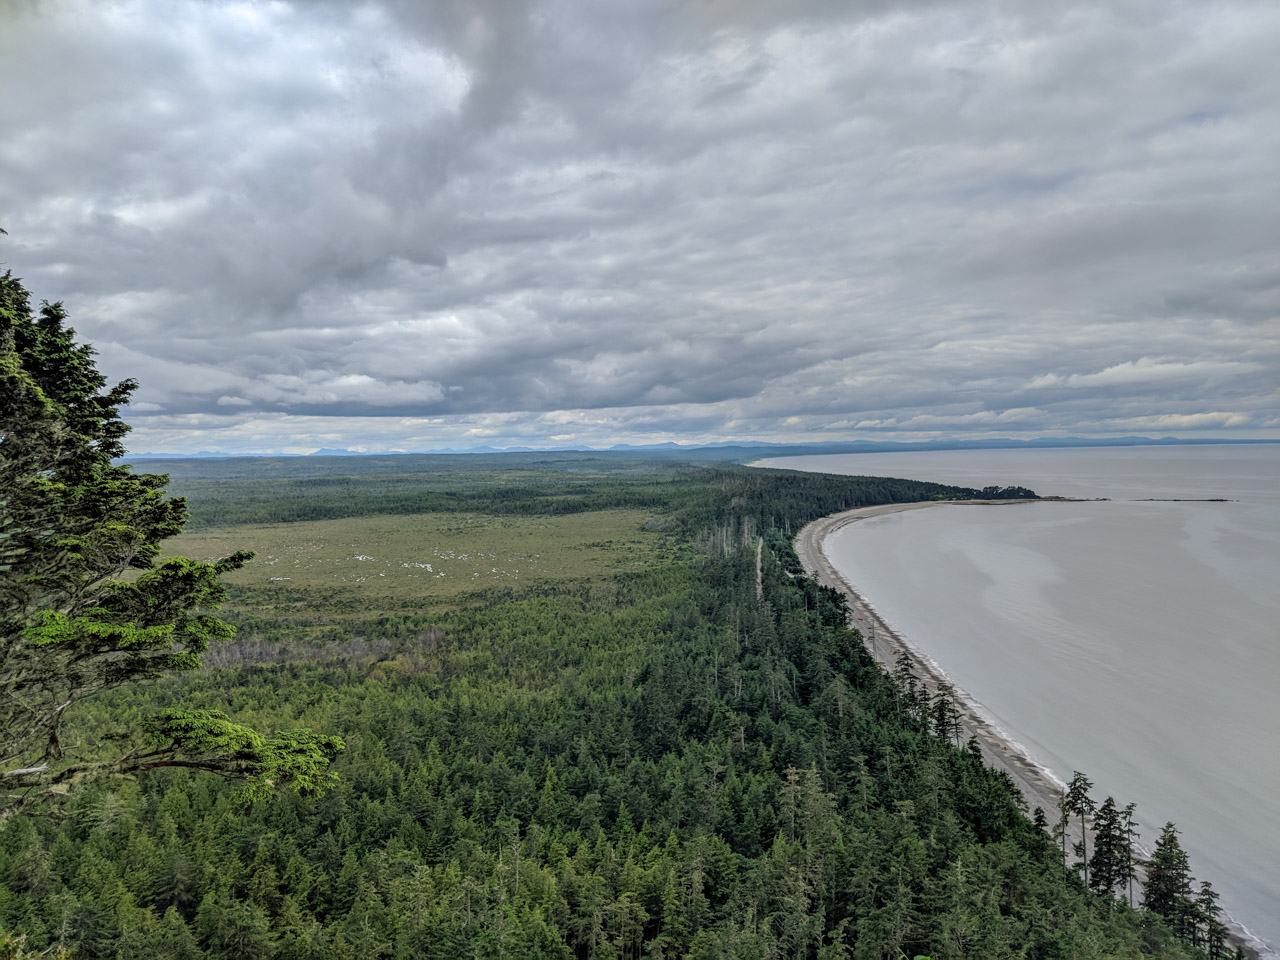 Looking south from Tow Hill, Haida Gwaii